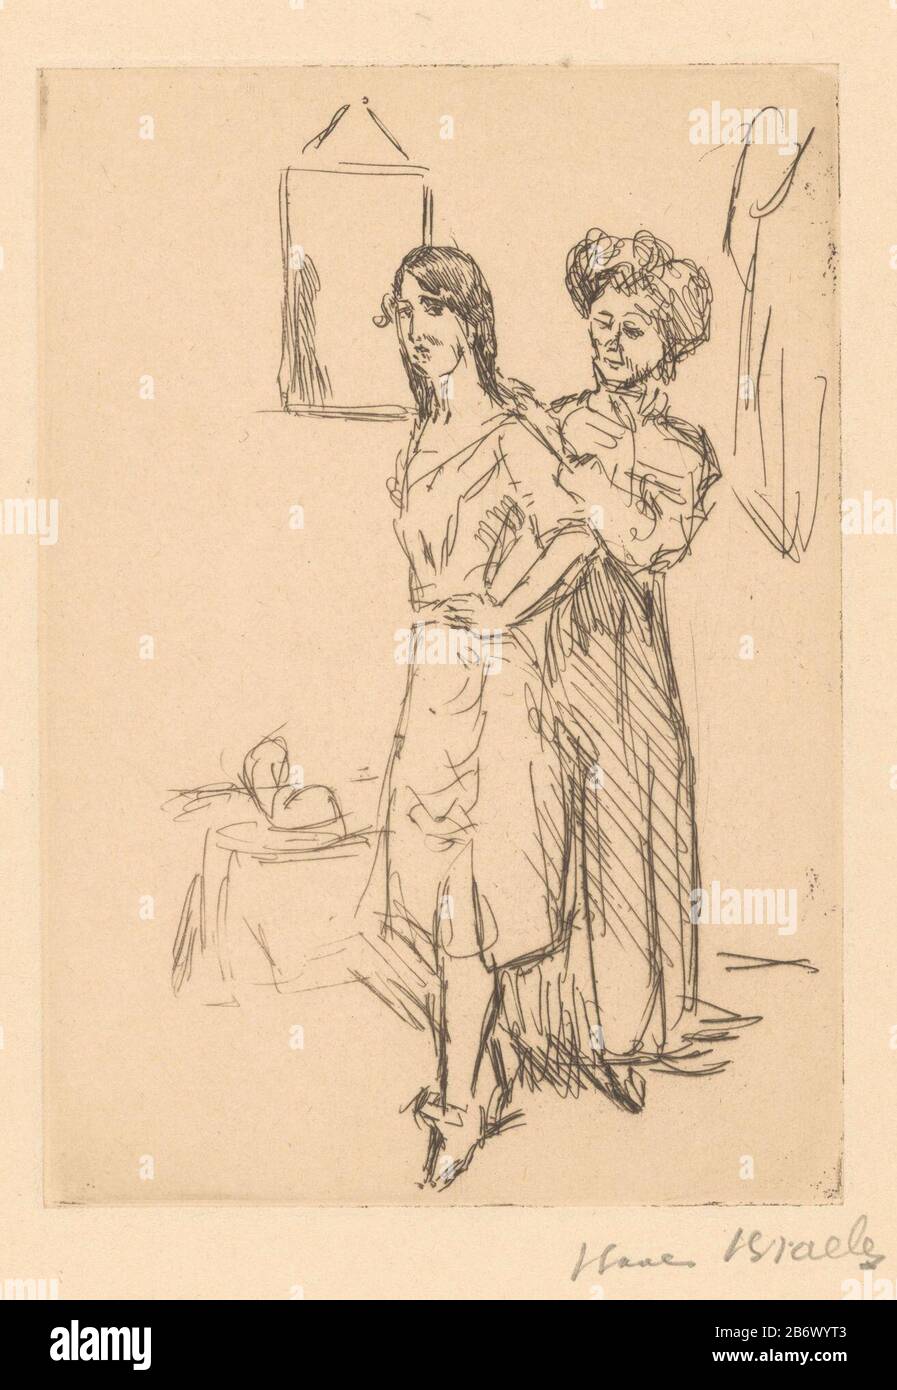 Jonge vrouw bij hoedenmaakster The woman stands with her hand on her hip while the milliner recording her size . In the background a hat on a tafel. Manufacturer : printmaker: Isaac Israels (personally signed) Date: 1878 - 1934 Material: paper Technique: etching Dimensions: plate edge: H 178 mm × W 125 mm Subject: hatteradult woman Stock Photo